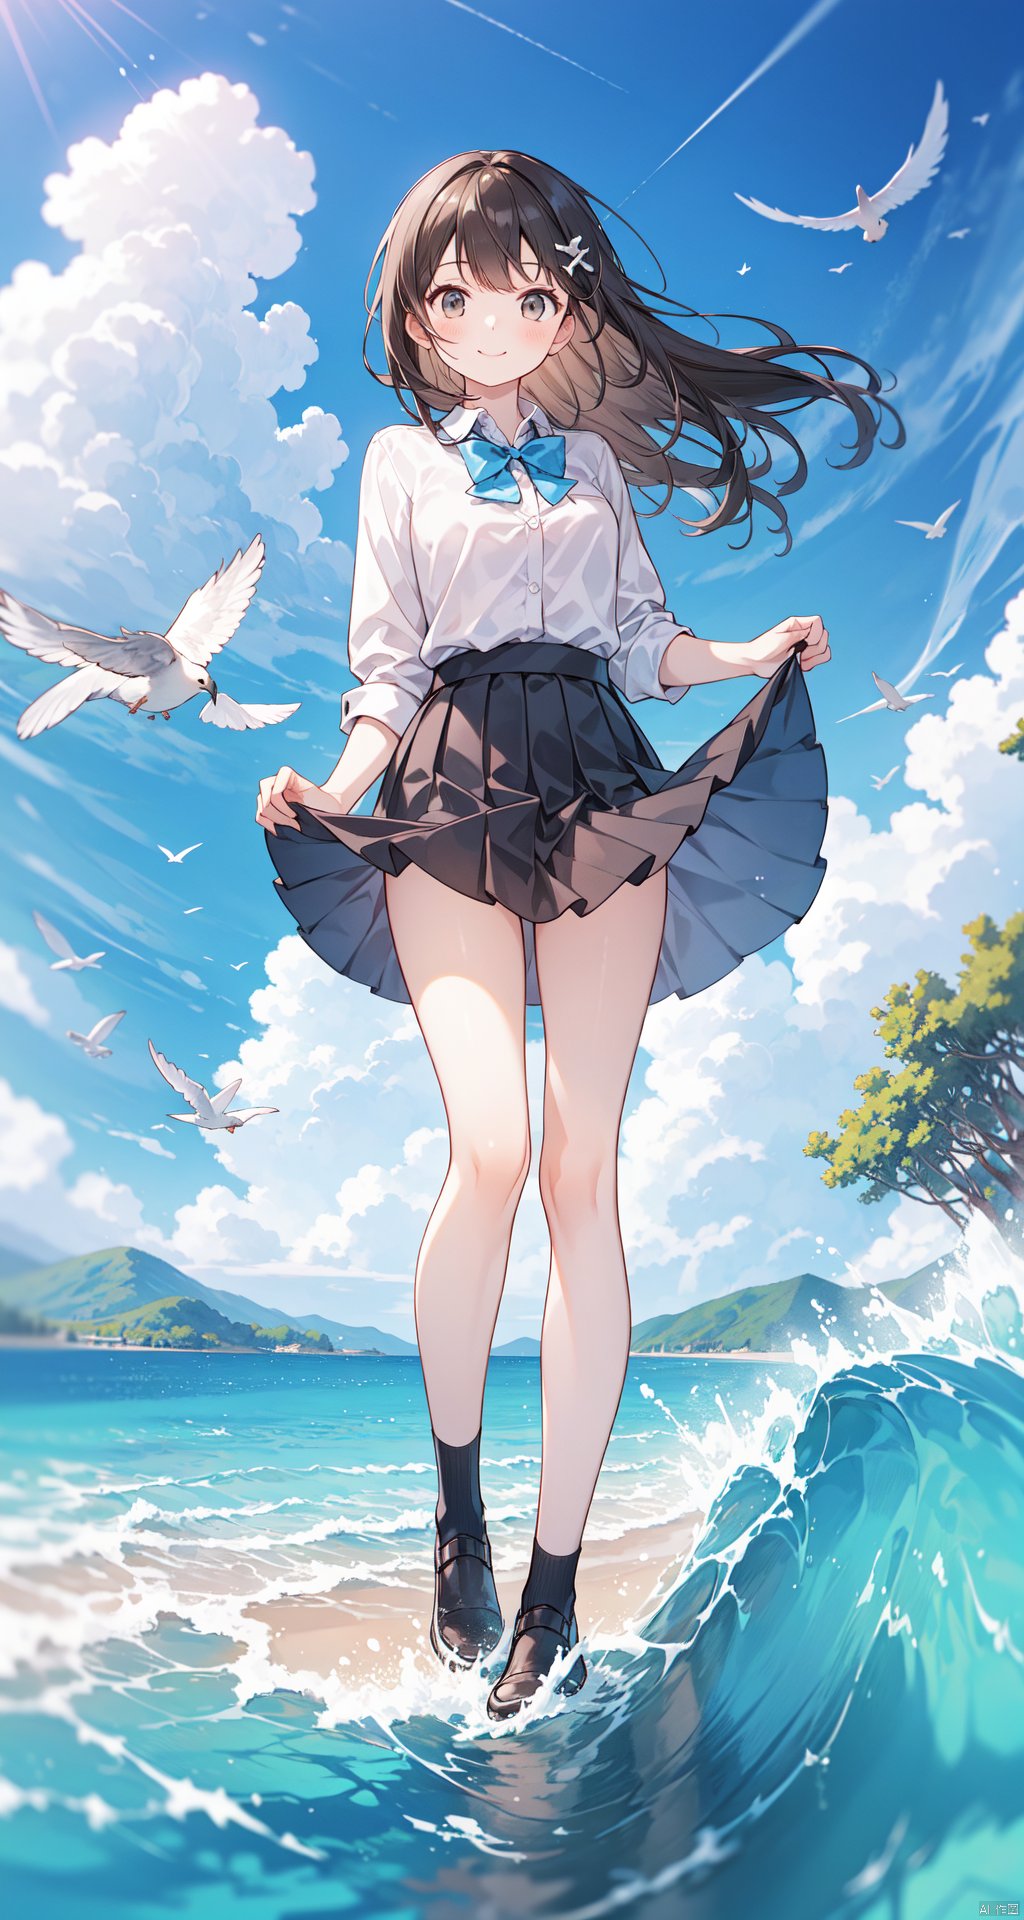  1girl, aircraft, airplane, animal, beach, bird, black_skirt, blue_bow, blue_sky, boat, bow, bowtie, brown_hair, cloud, cloudy_sky, copyright_name, crow, day, dolphin, dove, feathers, fighter_jet, fisheye, floating_hair, flock, flying, horizon, lake, long_hair, looking_at_viewer, mountain, ocean, outdoors, pleated_skirt, school_uniform, seagull, ship, shirt, shoes, skirt, sky, smile, solo, standing, standing_on_liquid, warship, water, watercraft, waves, white_feathers, white_shirt, wind, wind_lift